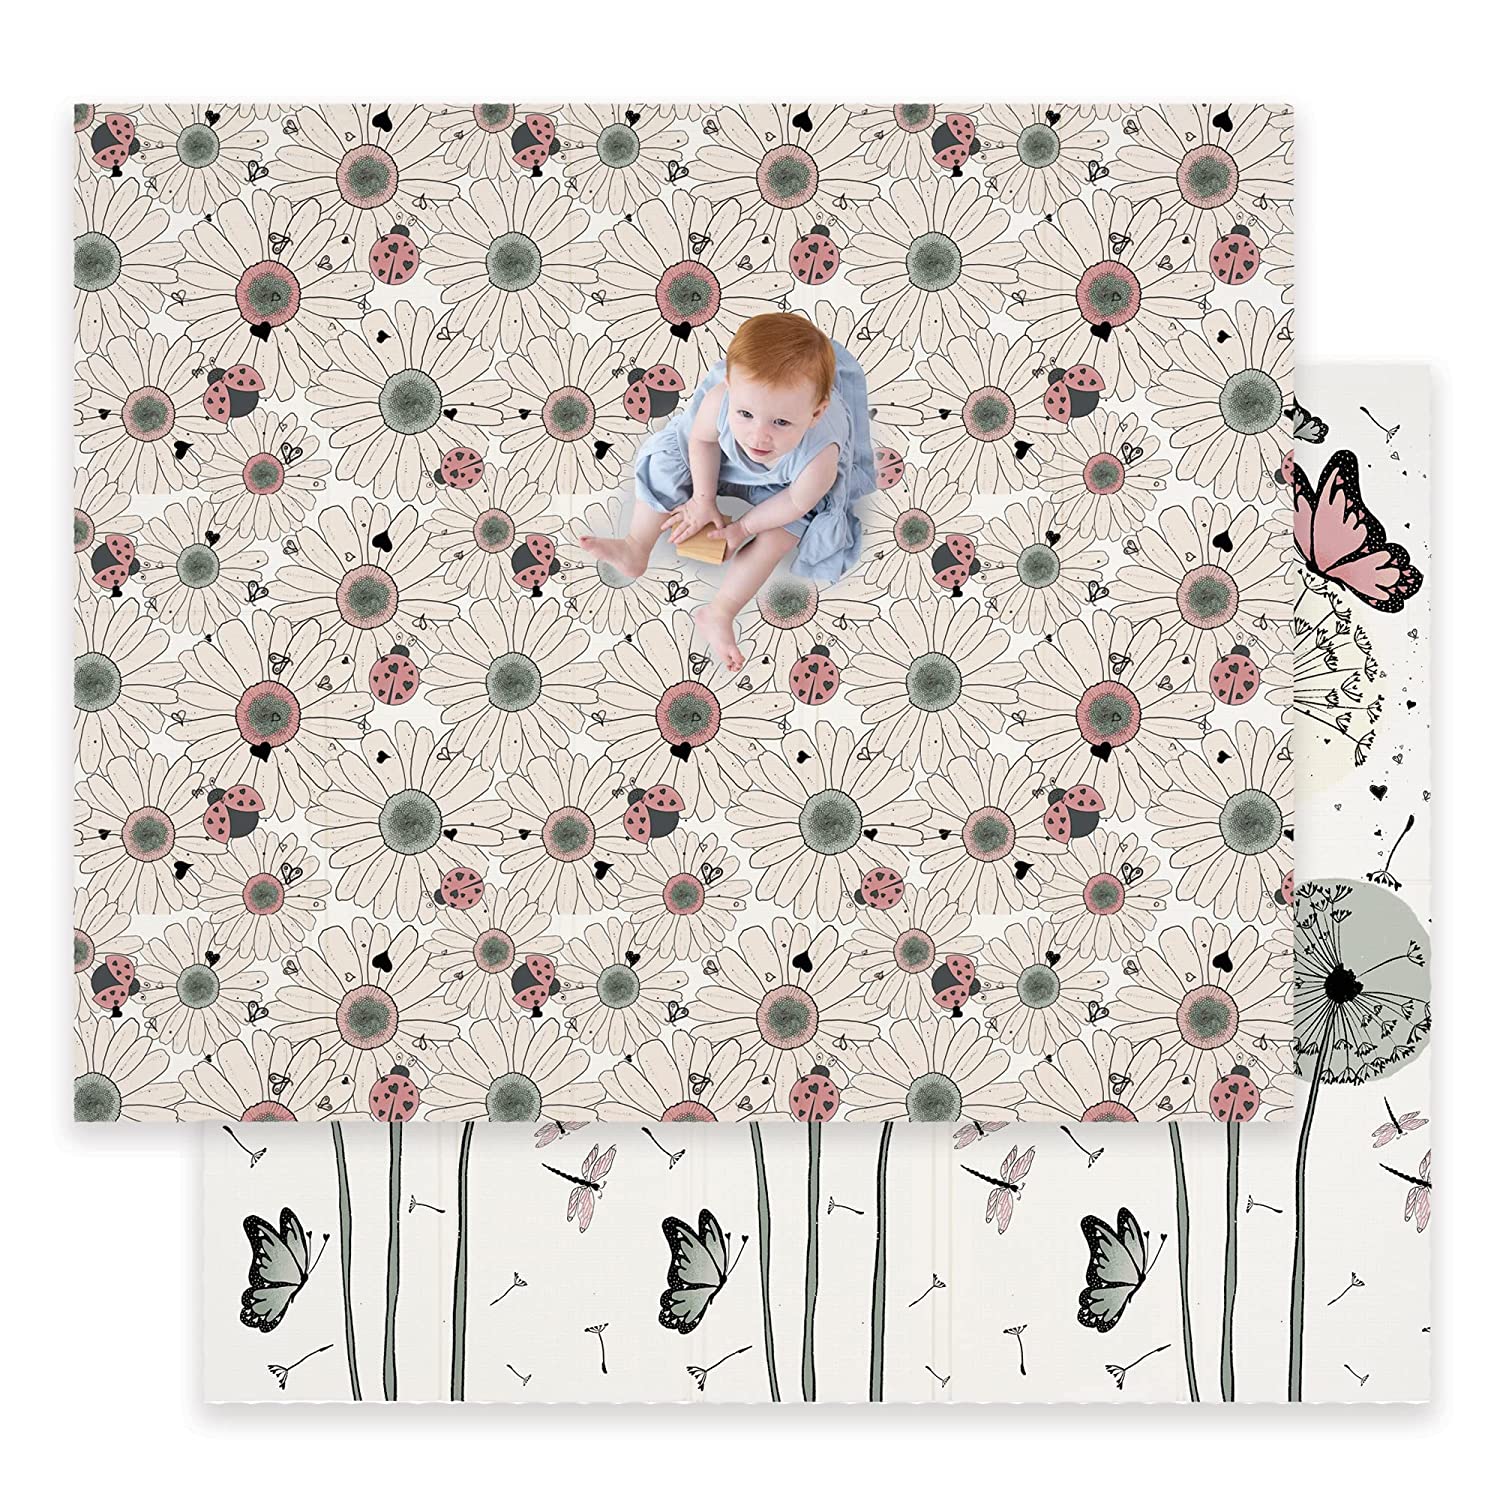 Babies: Flowers and Butterfly Play Mats - Charming Delight!